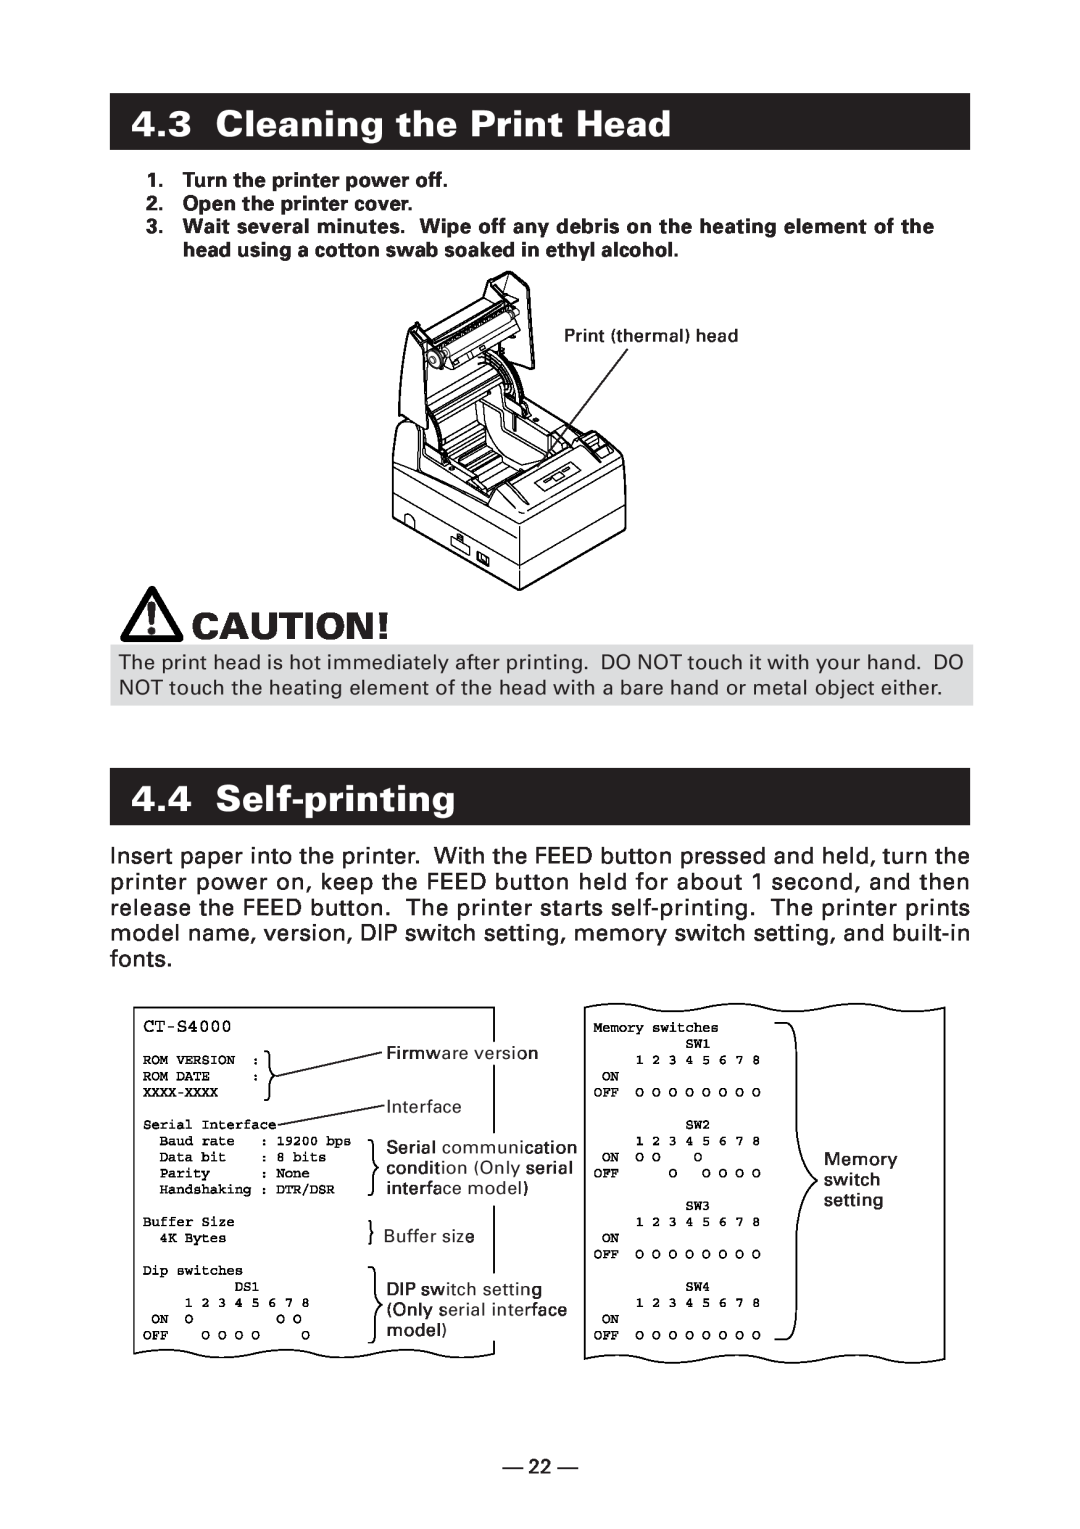 Citizen Systems CT-S4000DC user manual Cleaning the Print Head, Self-printing, Buffer size 